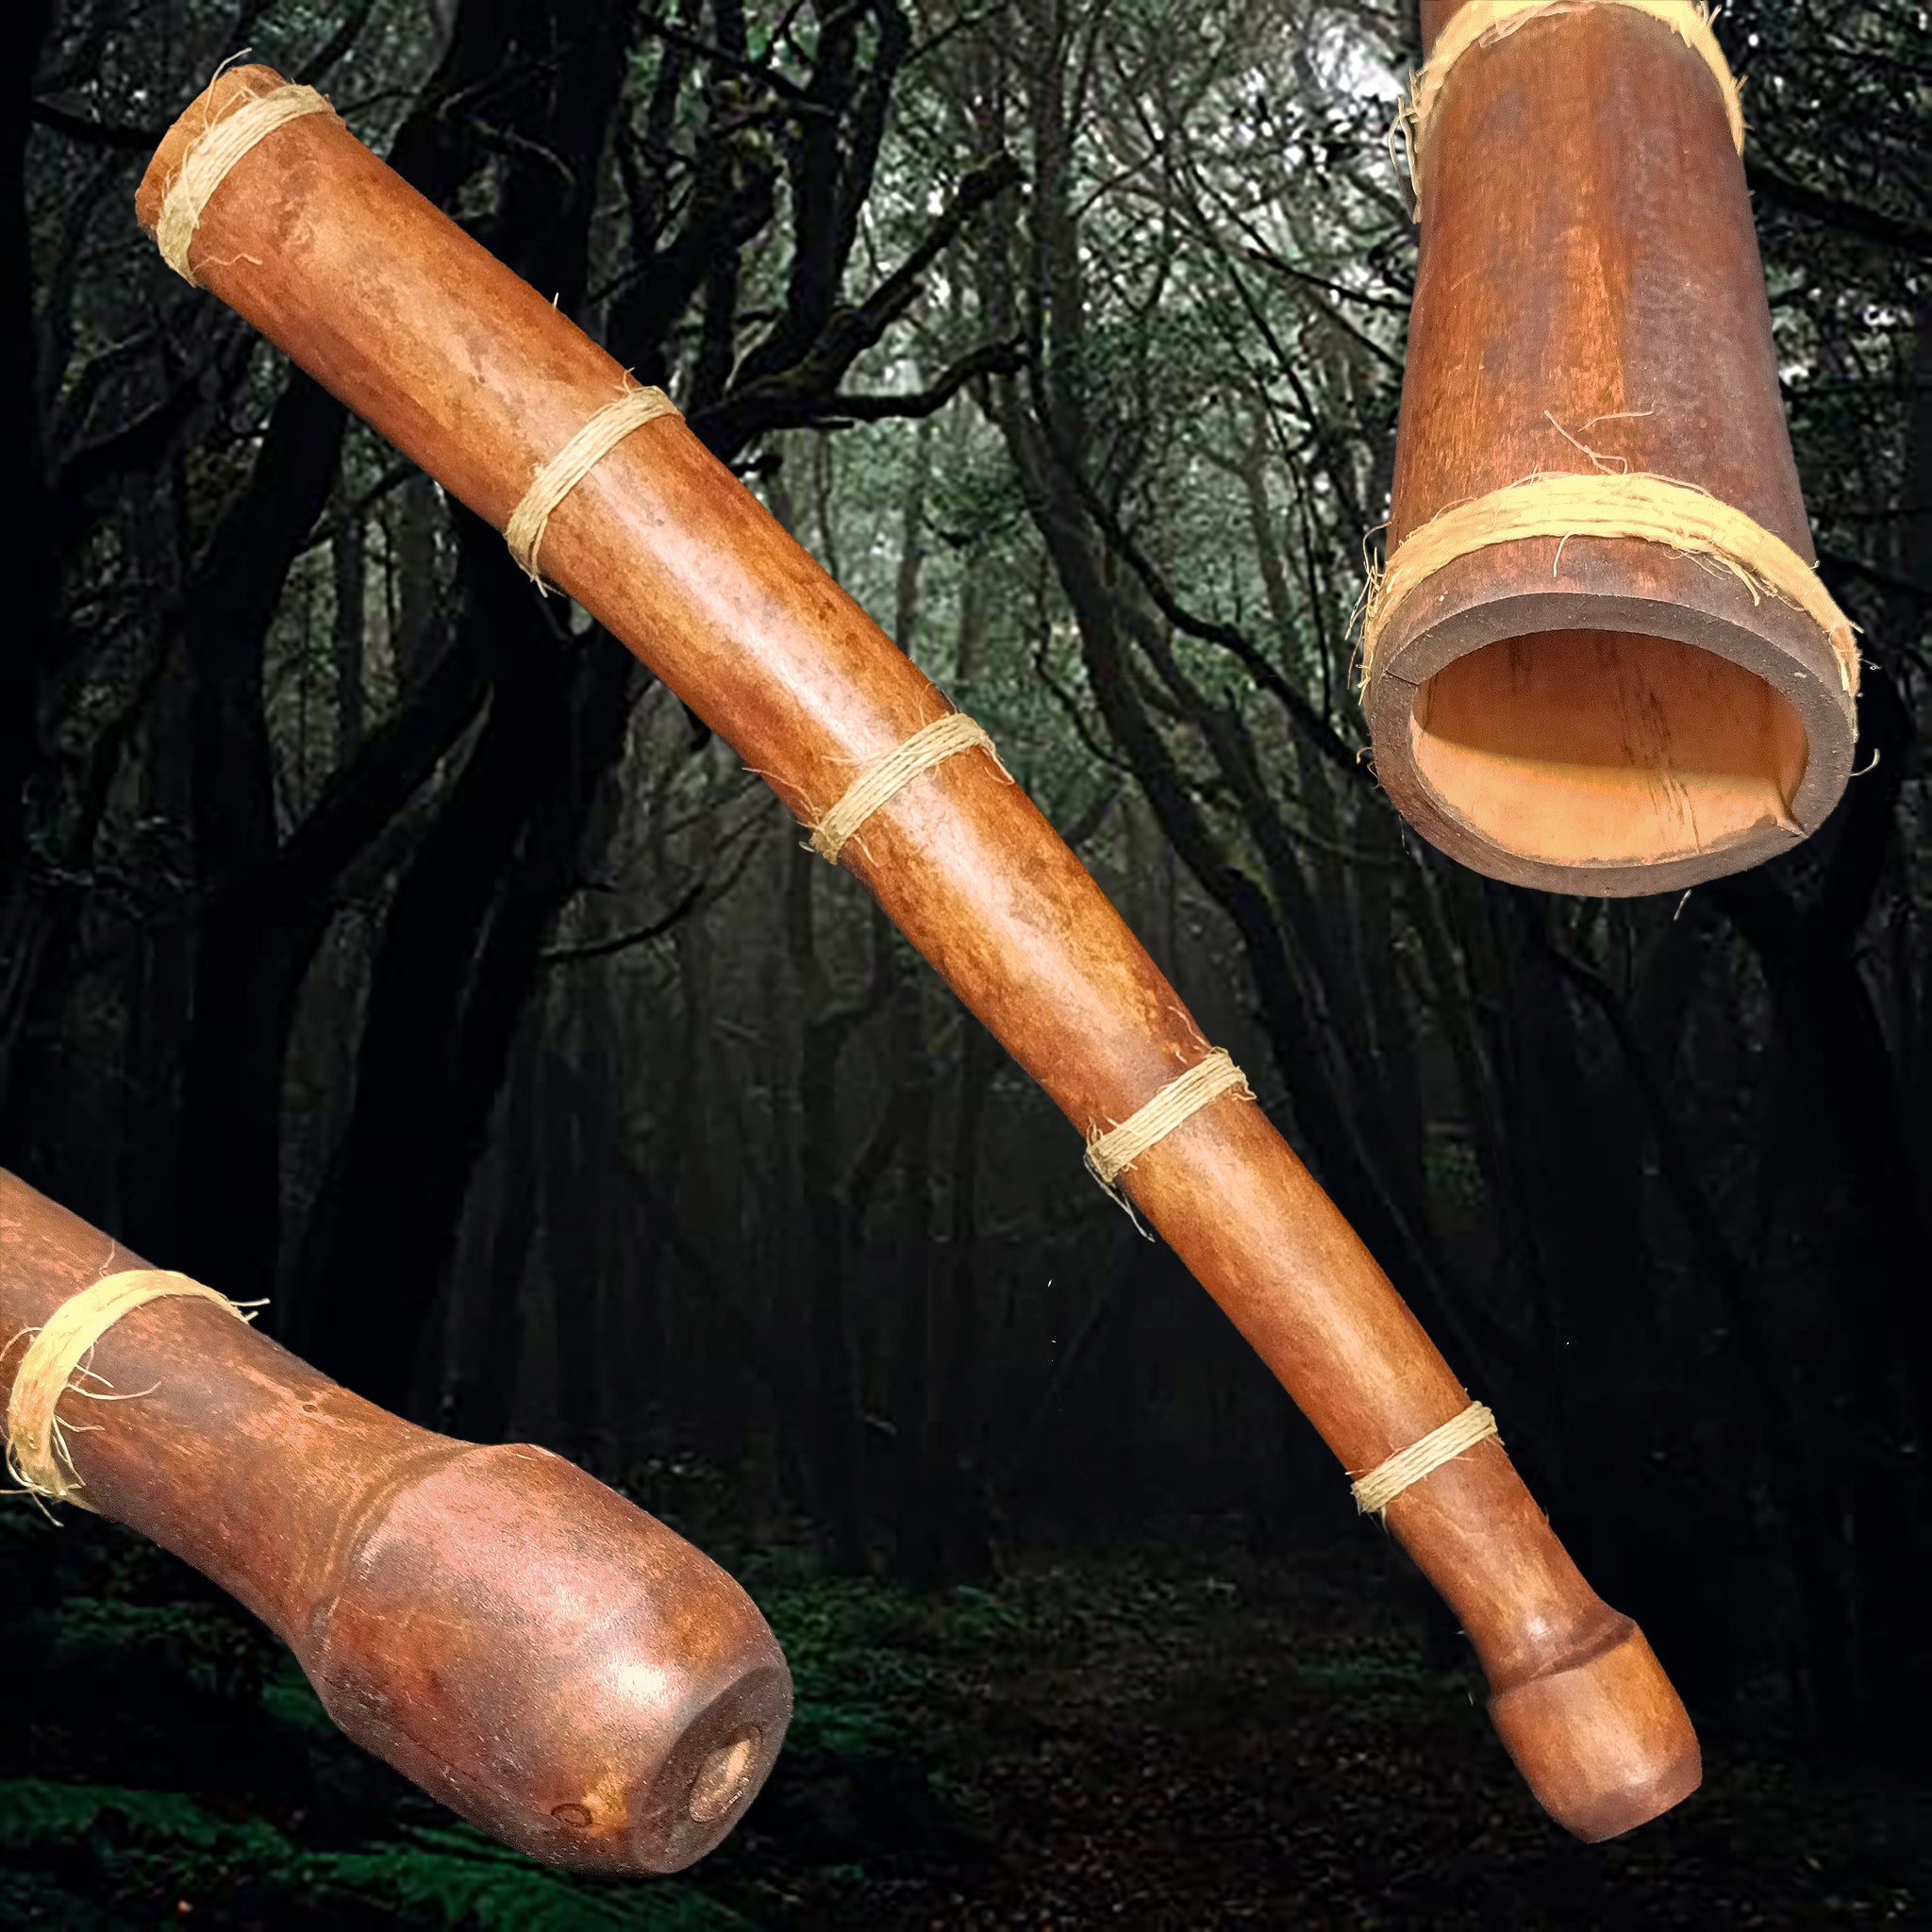 Handmade Replica Viking Age War Horn / Lur in Stained Willow Wood - Different Angles